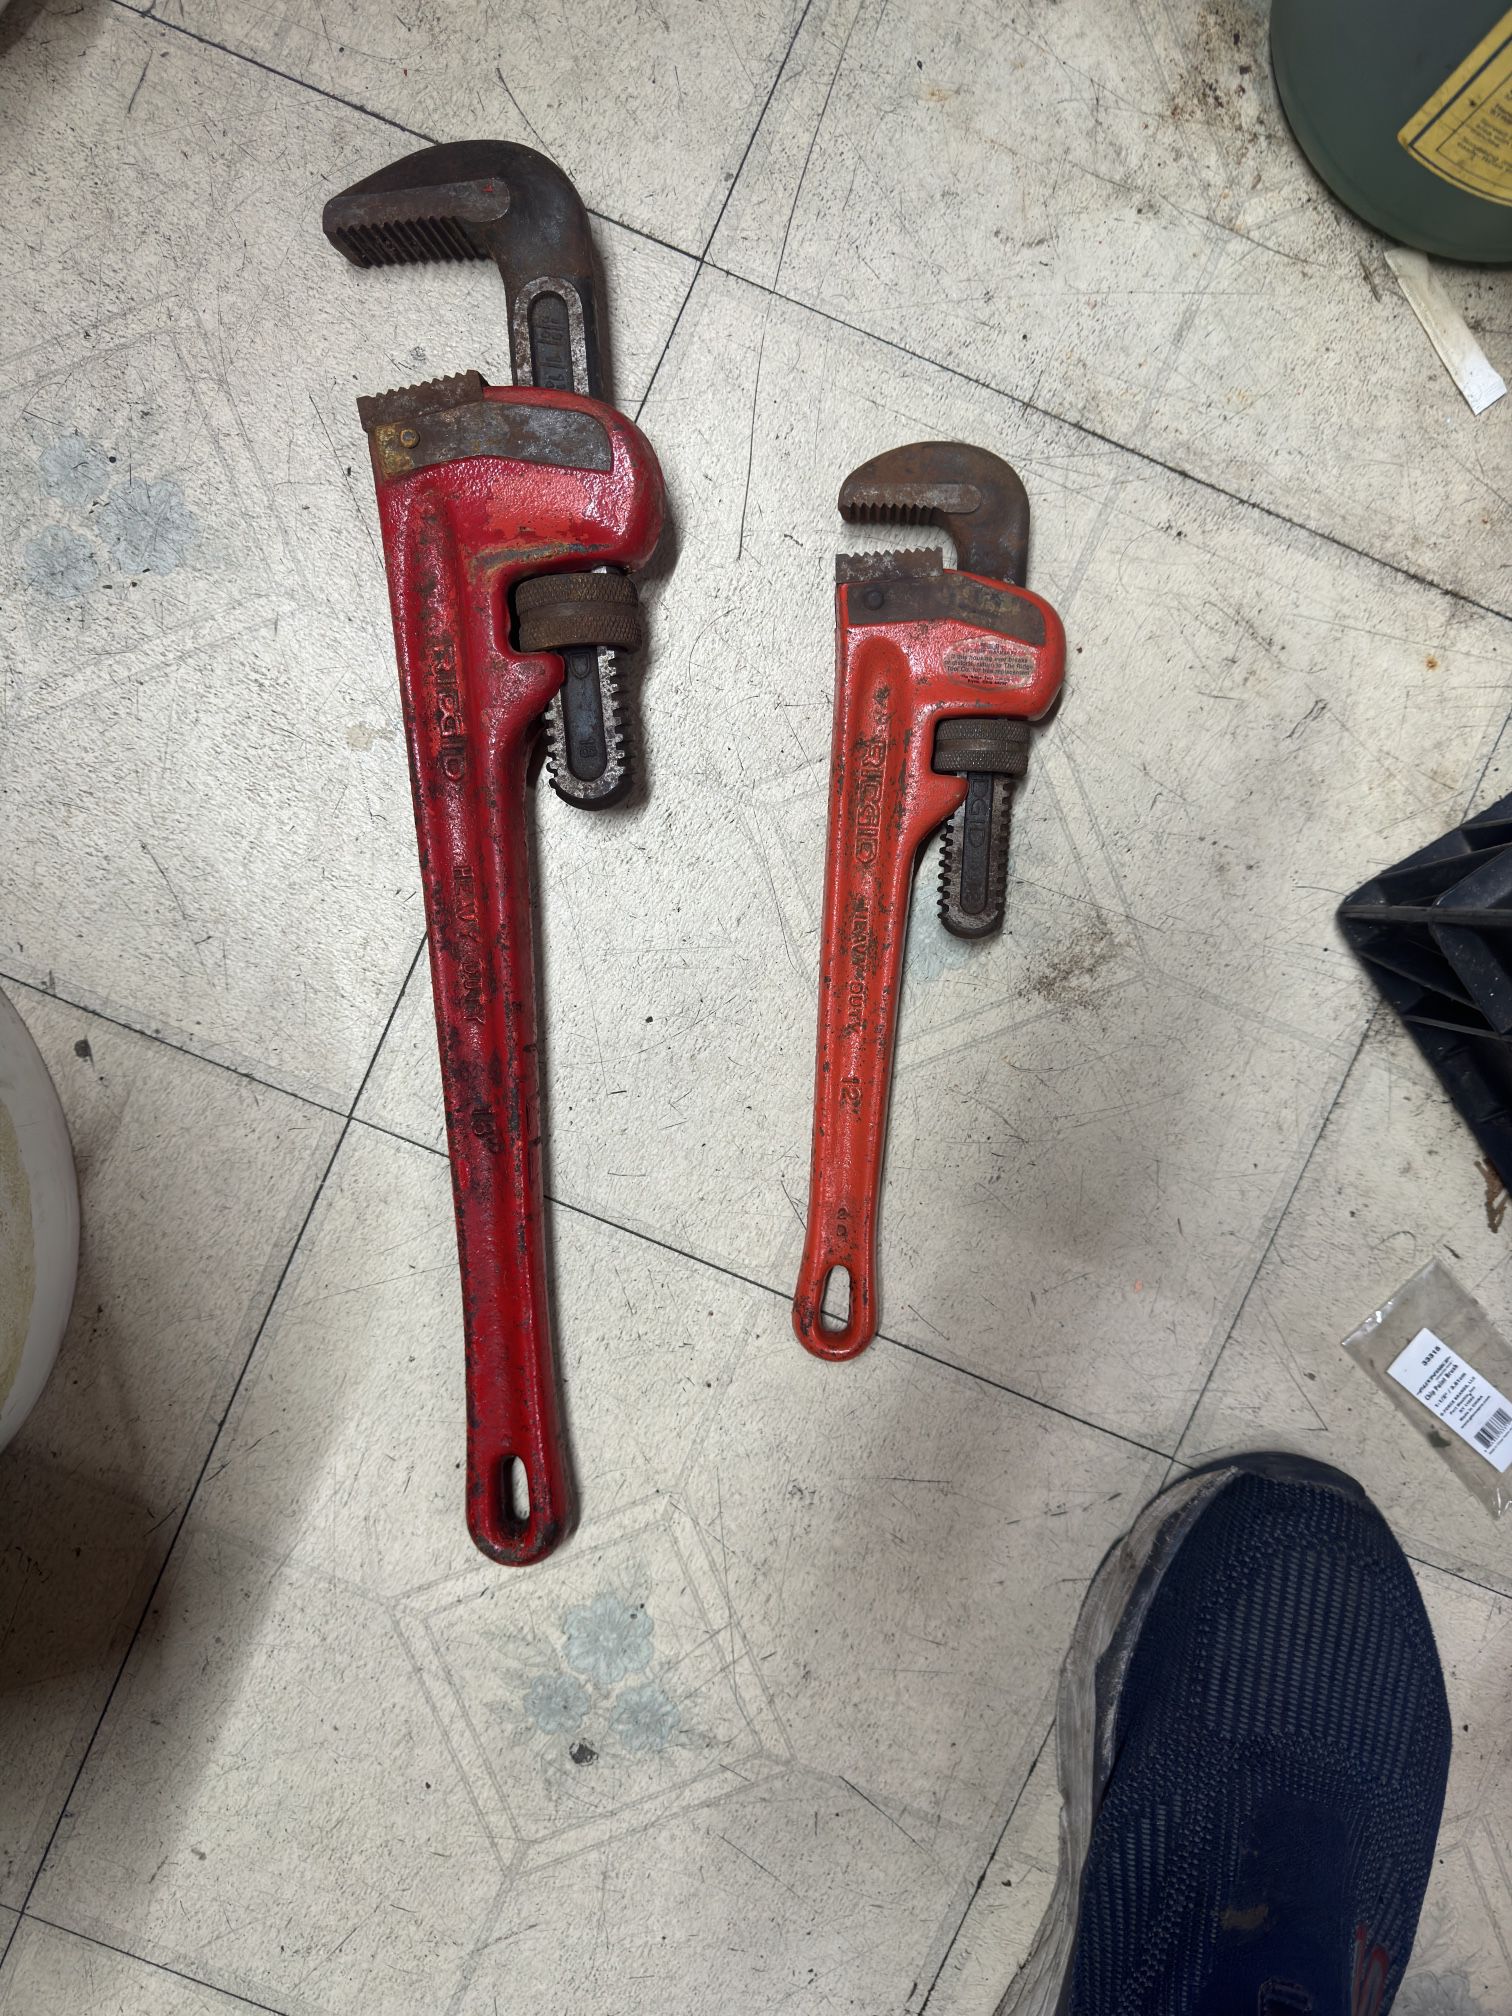 Rigid Pipe Wrench 